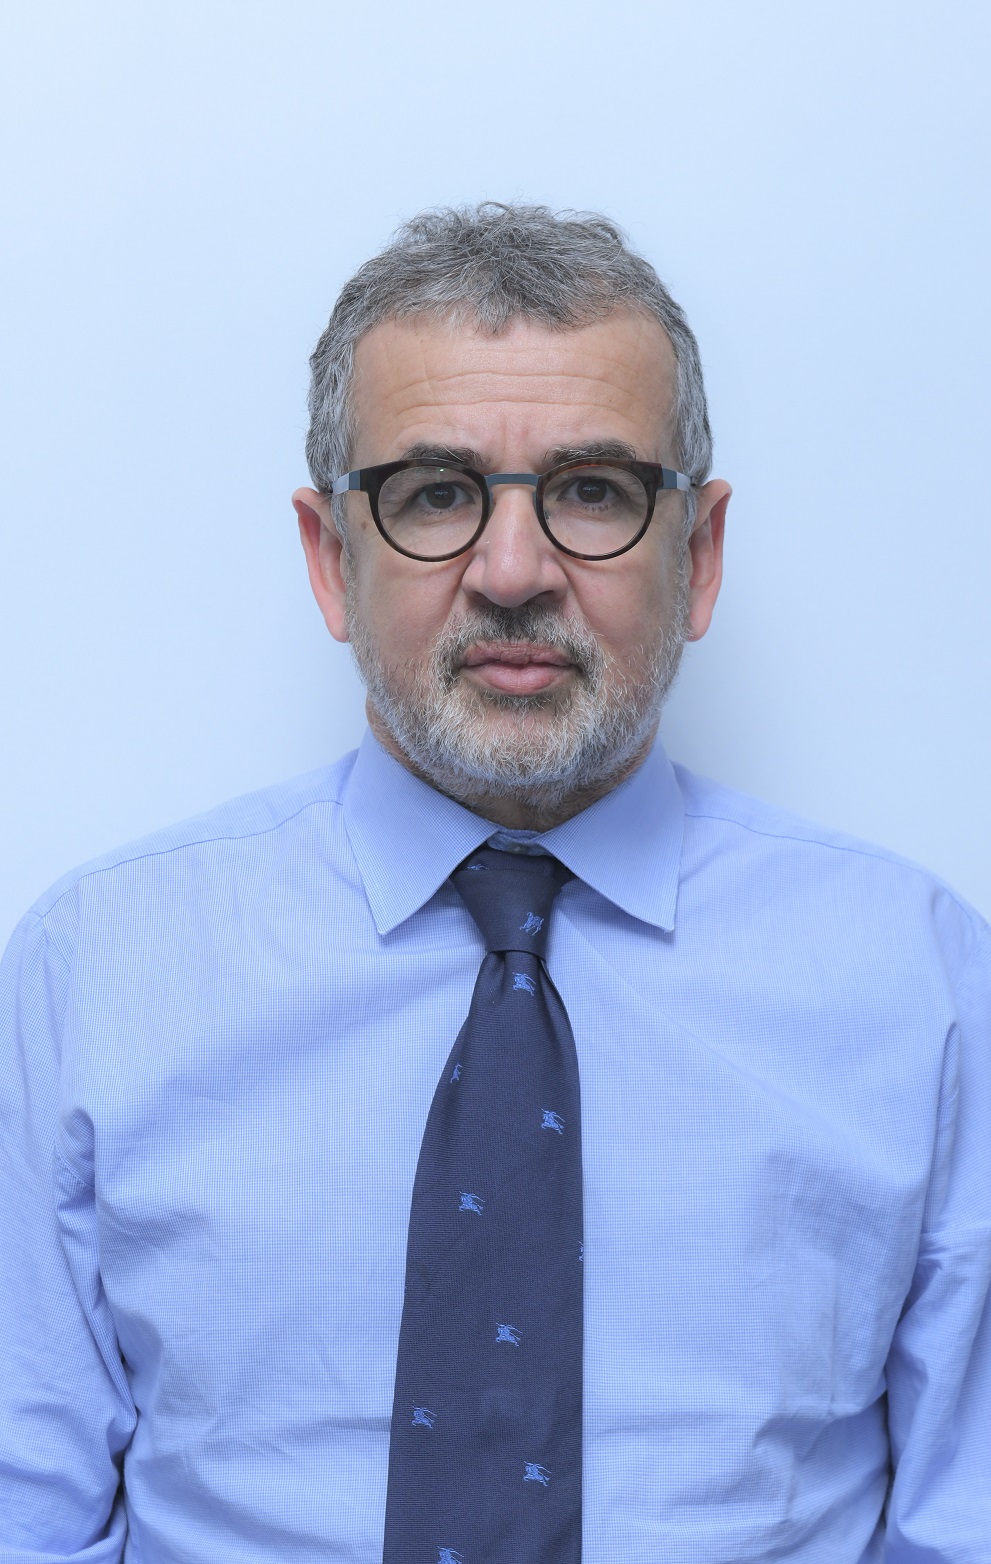 Image of Noureddine Mouaddib, UIR president and supporter of the translation project. Credit: UIR